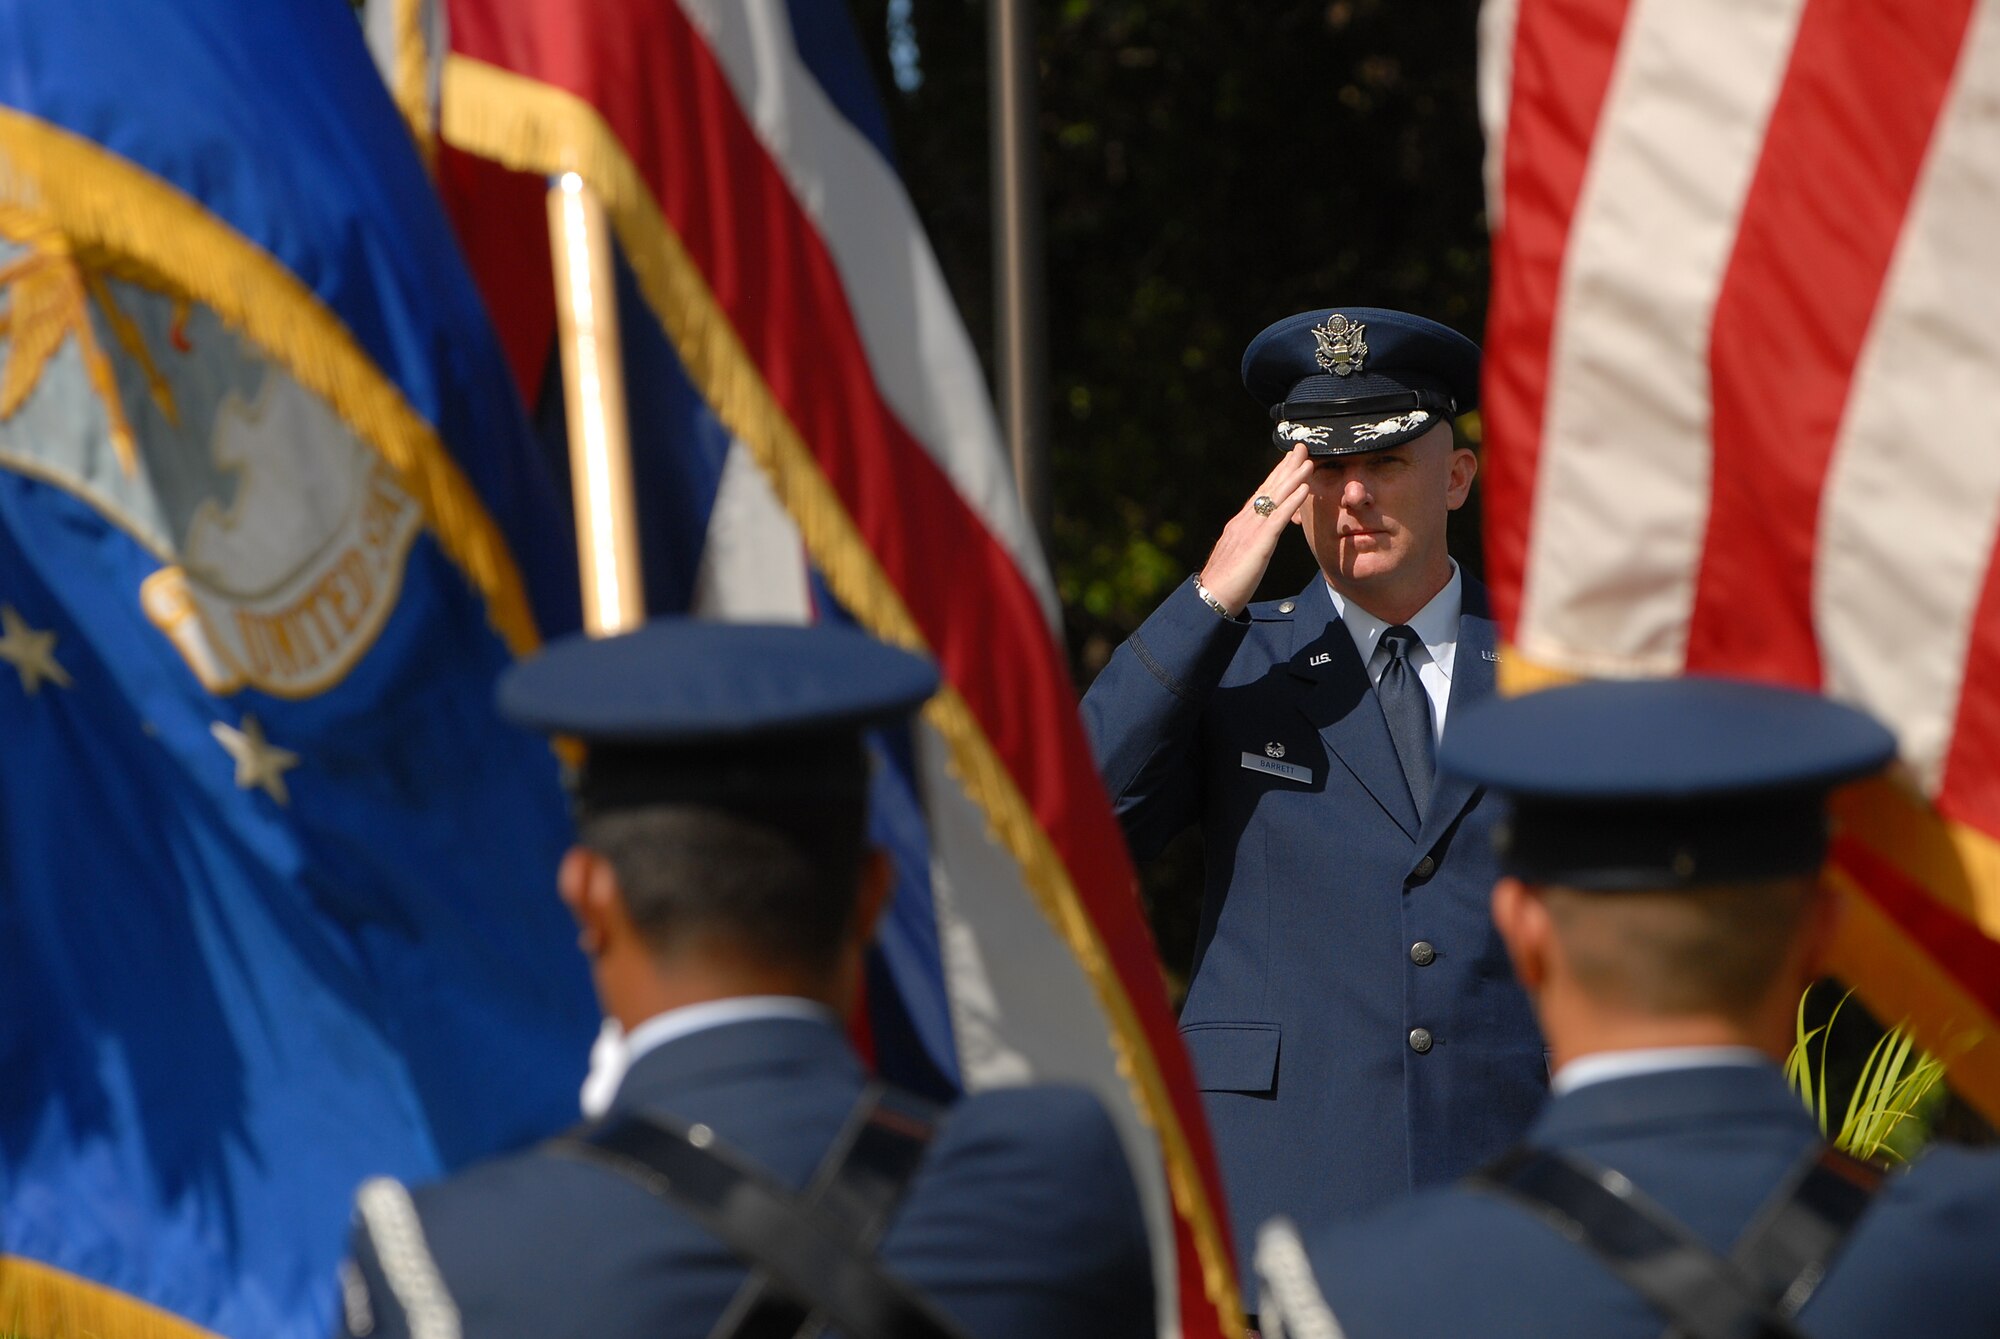 JOINT BASE PEARL HARBOR HICKAM, Hawaii - Col. Sam Barrett, 15th Wing commander, salutes the colors during his change of command ceremony May 18. The change of command also included a re-designation from the 15th Airlift Wing to the 15th Wing and remains assigned to the 13th Air Force. The re-designation reflects the mission change of the 15th Wing that will activate an active duty F-22 squadron and KC-135 squadron this summer. (U.S. Air Force photo/Staff Sgt. Mike Meares)